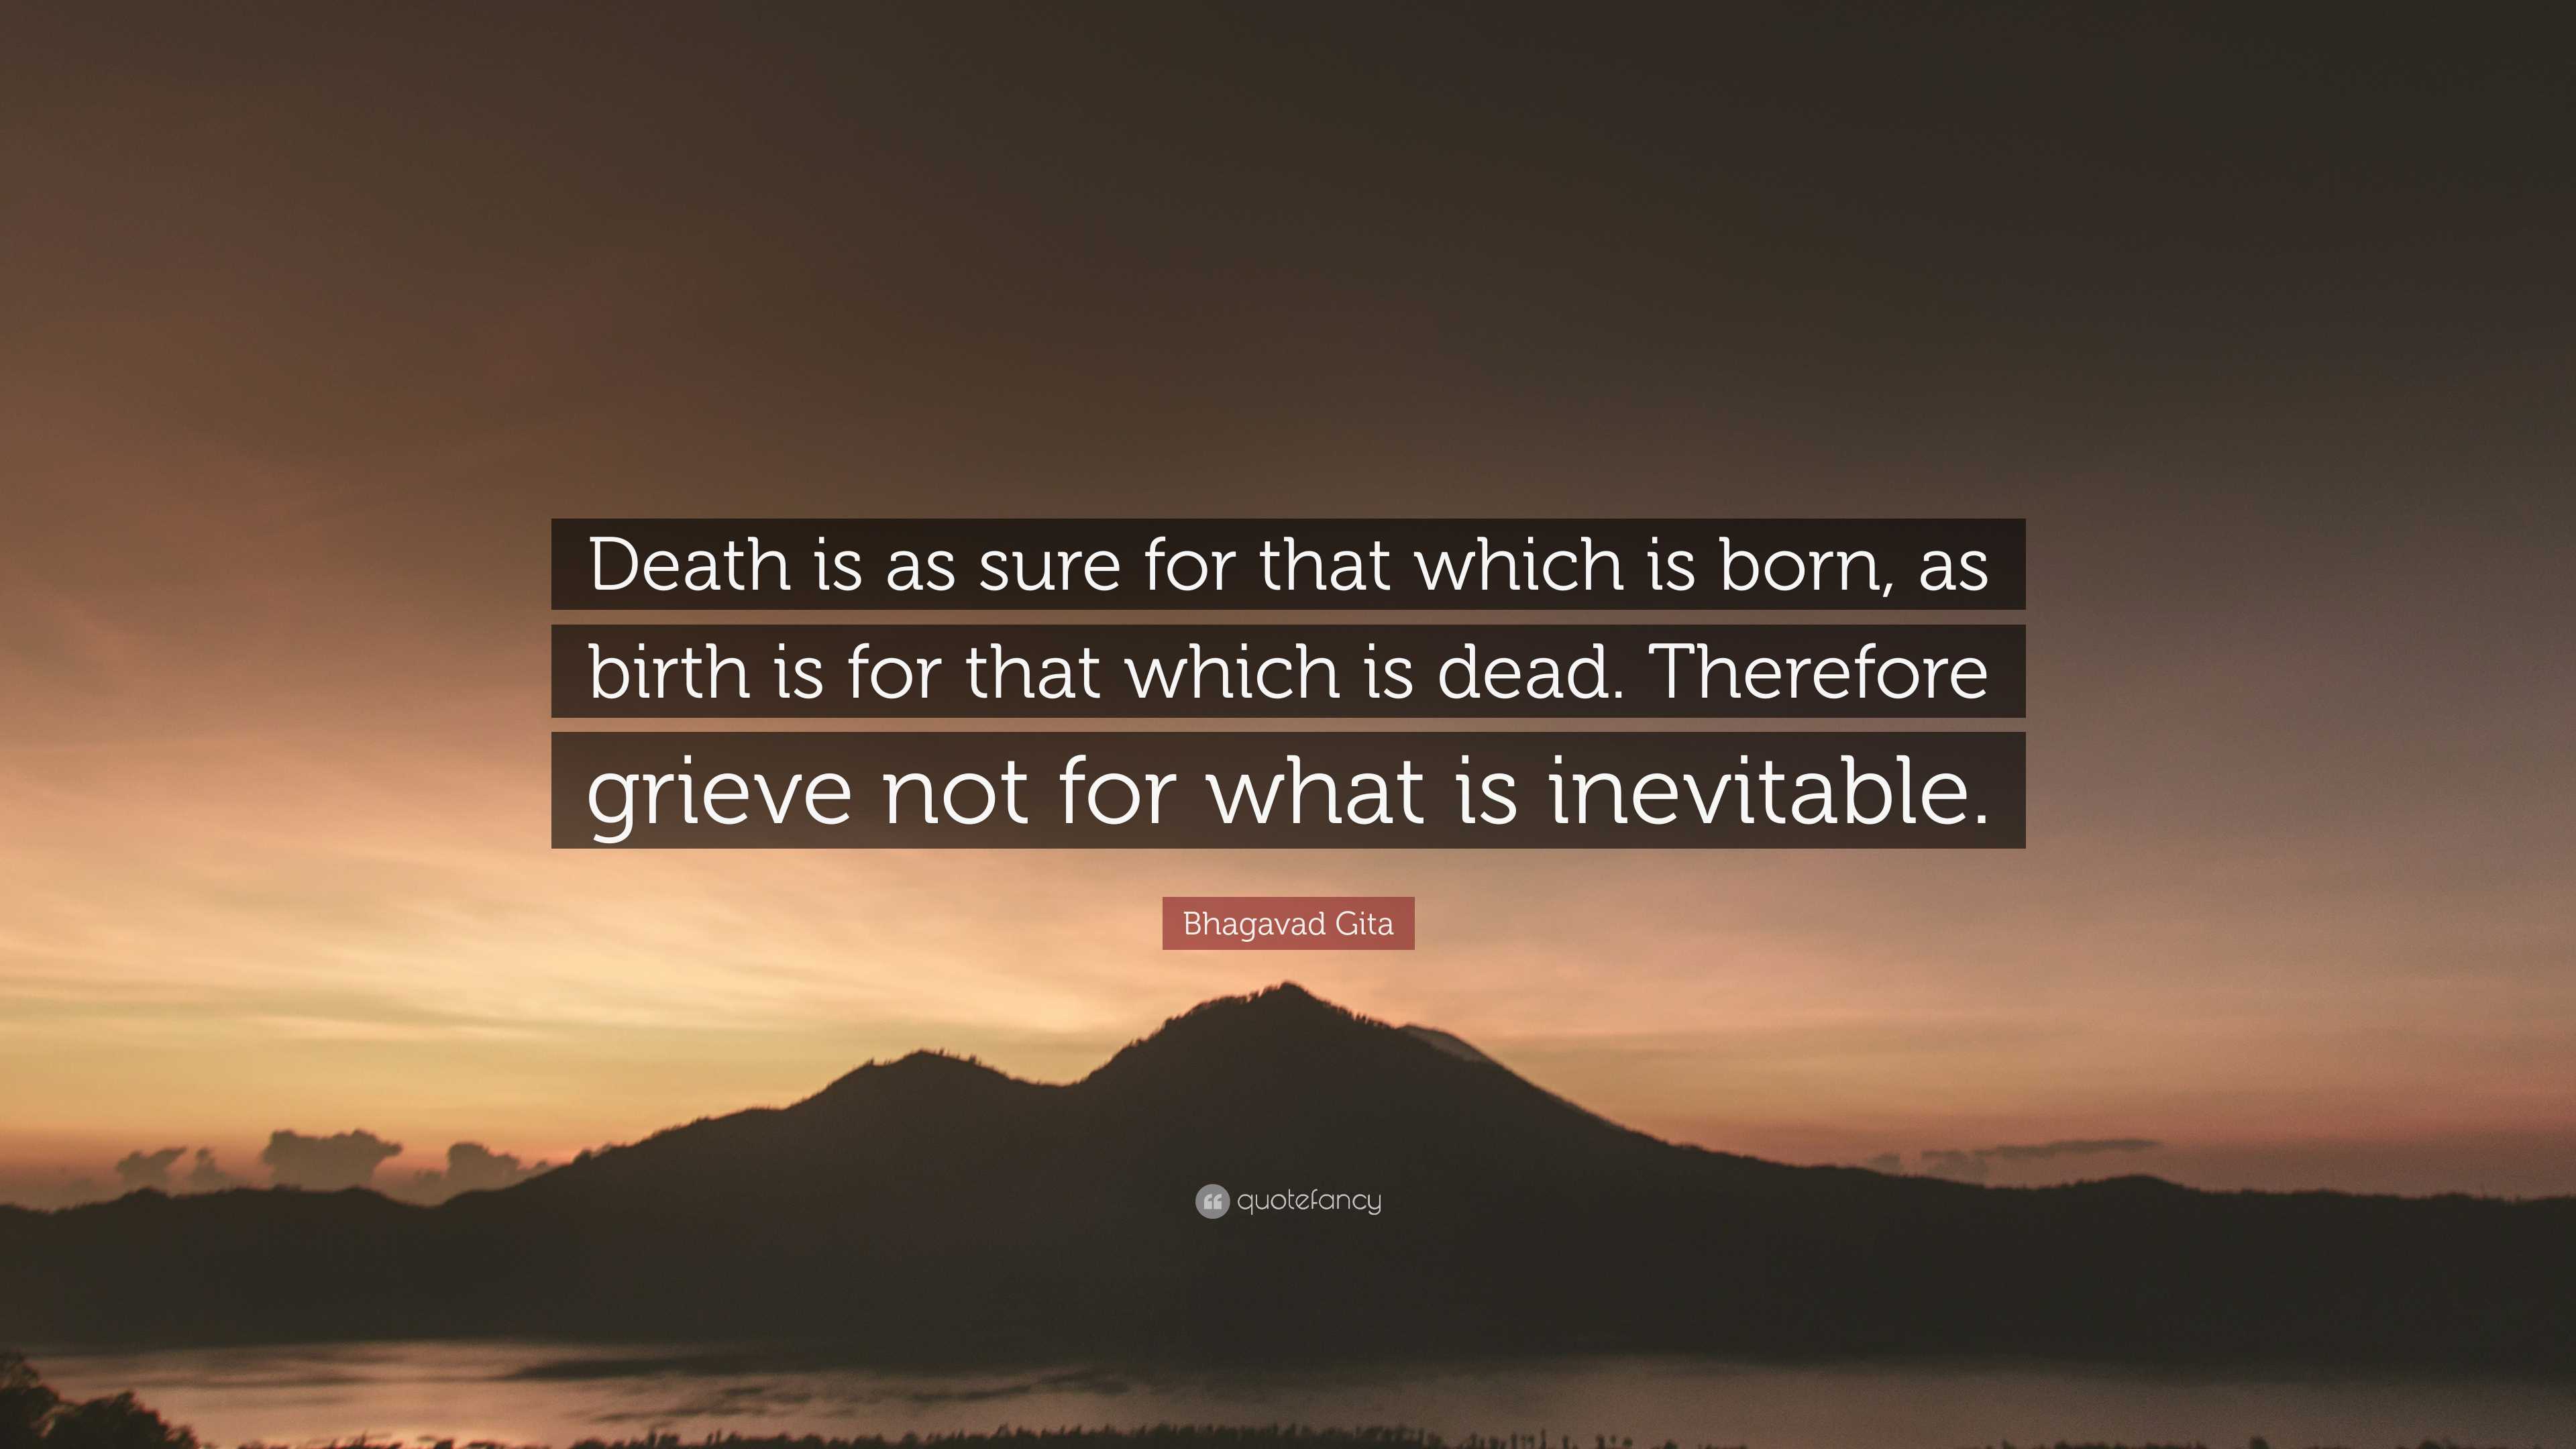 Bhagavad Gita Quote: “Death is as sure for that which is born, as birth ...